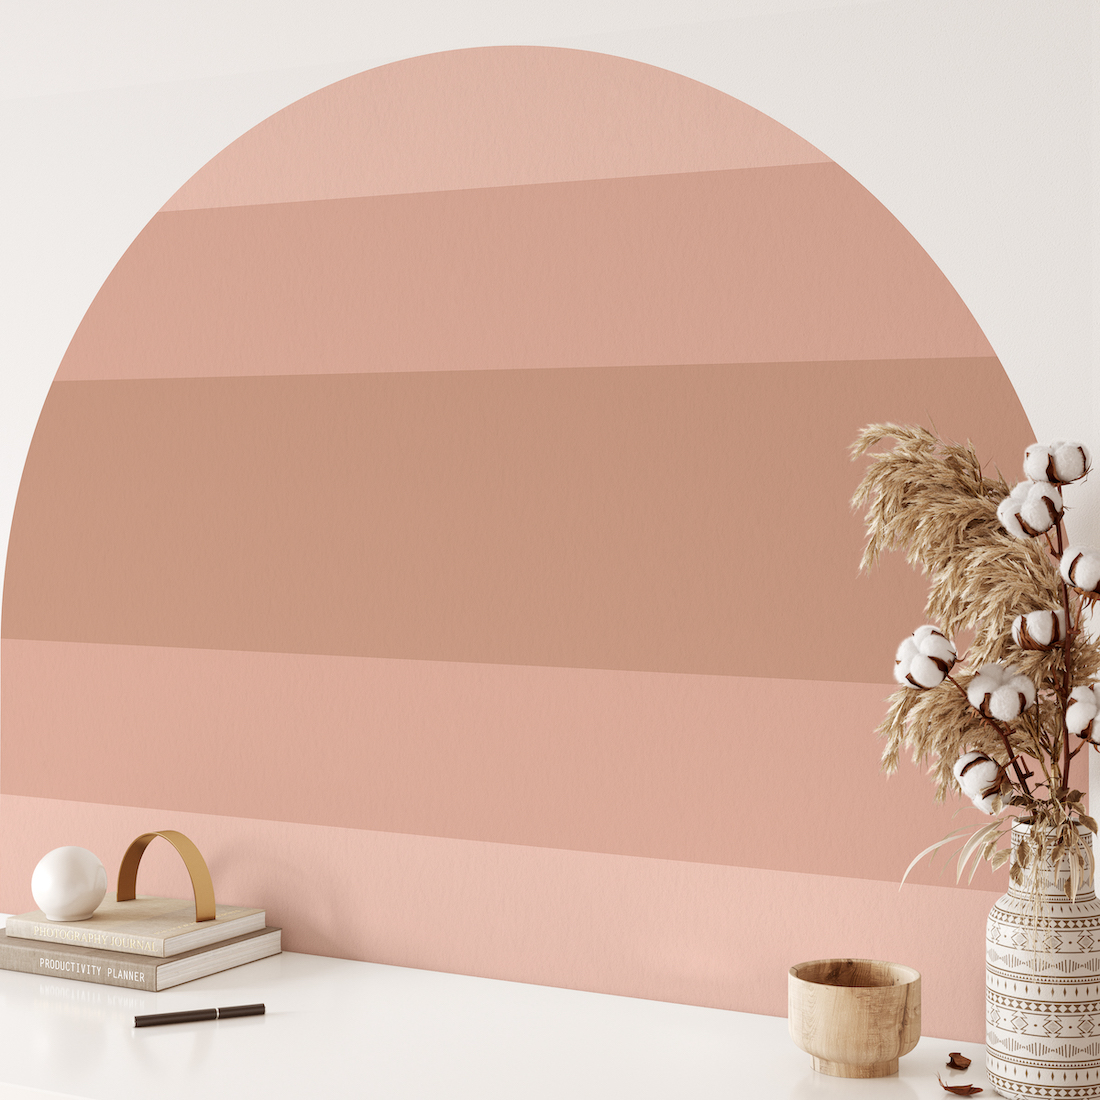 Removable headboard wall decal in hues of nude